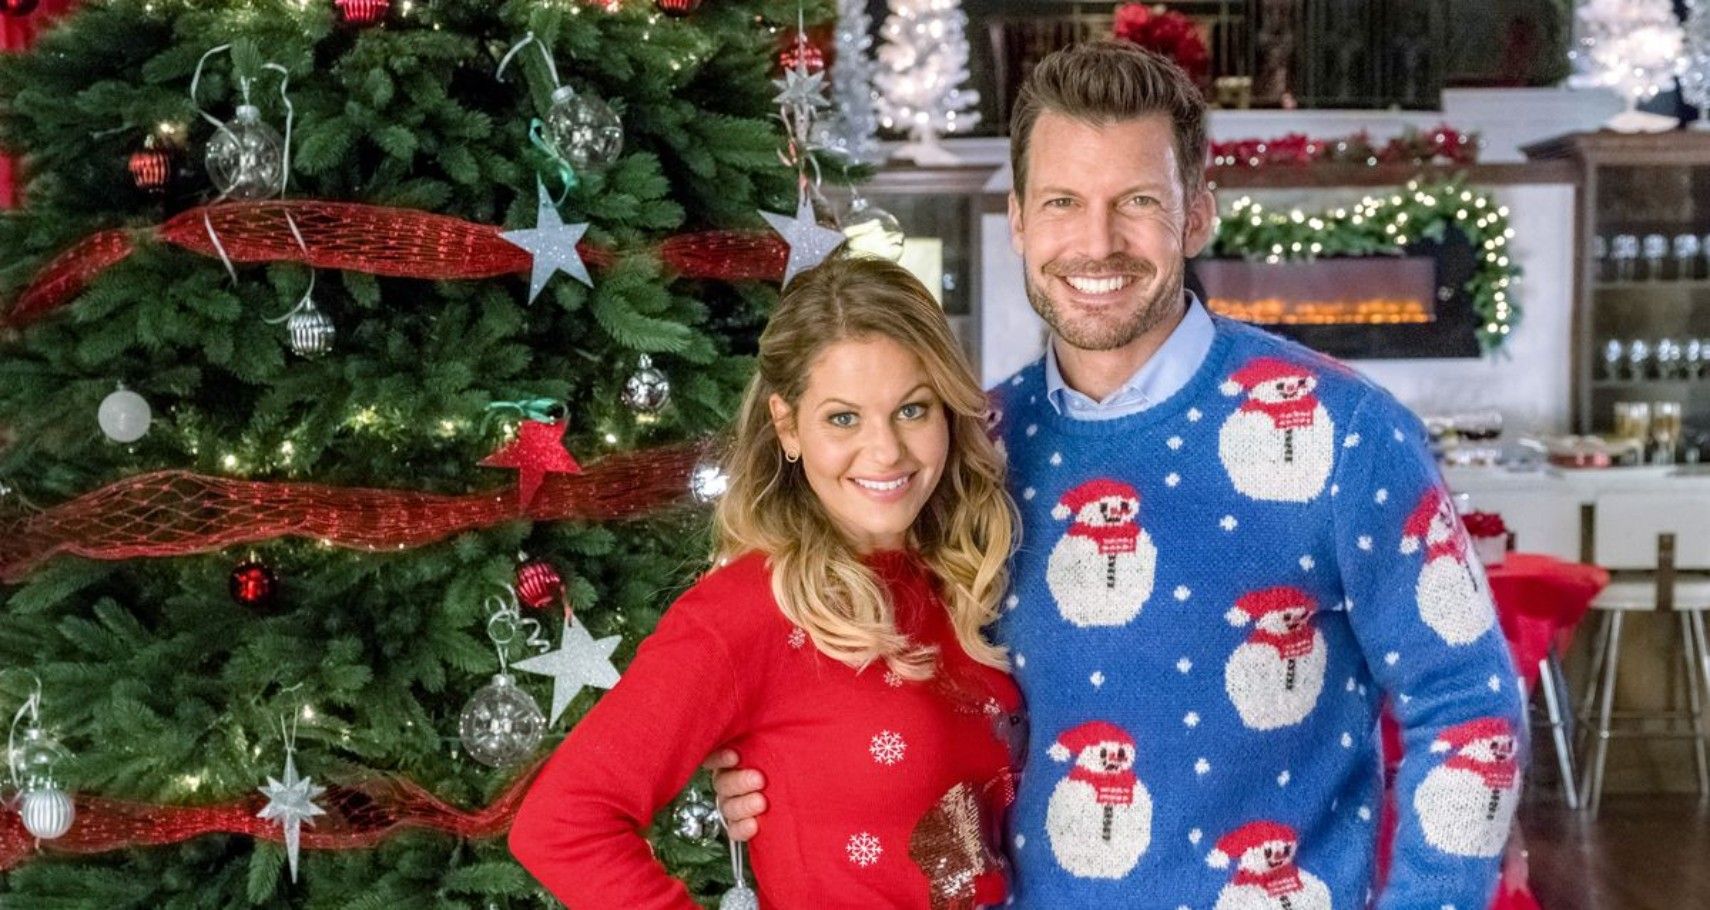 Hallmark Christmas Movies: 5 Best & Worst Tropes (We Can't Believe They Reuse)